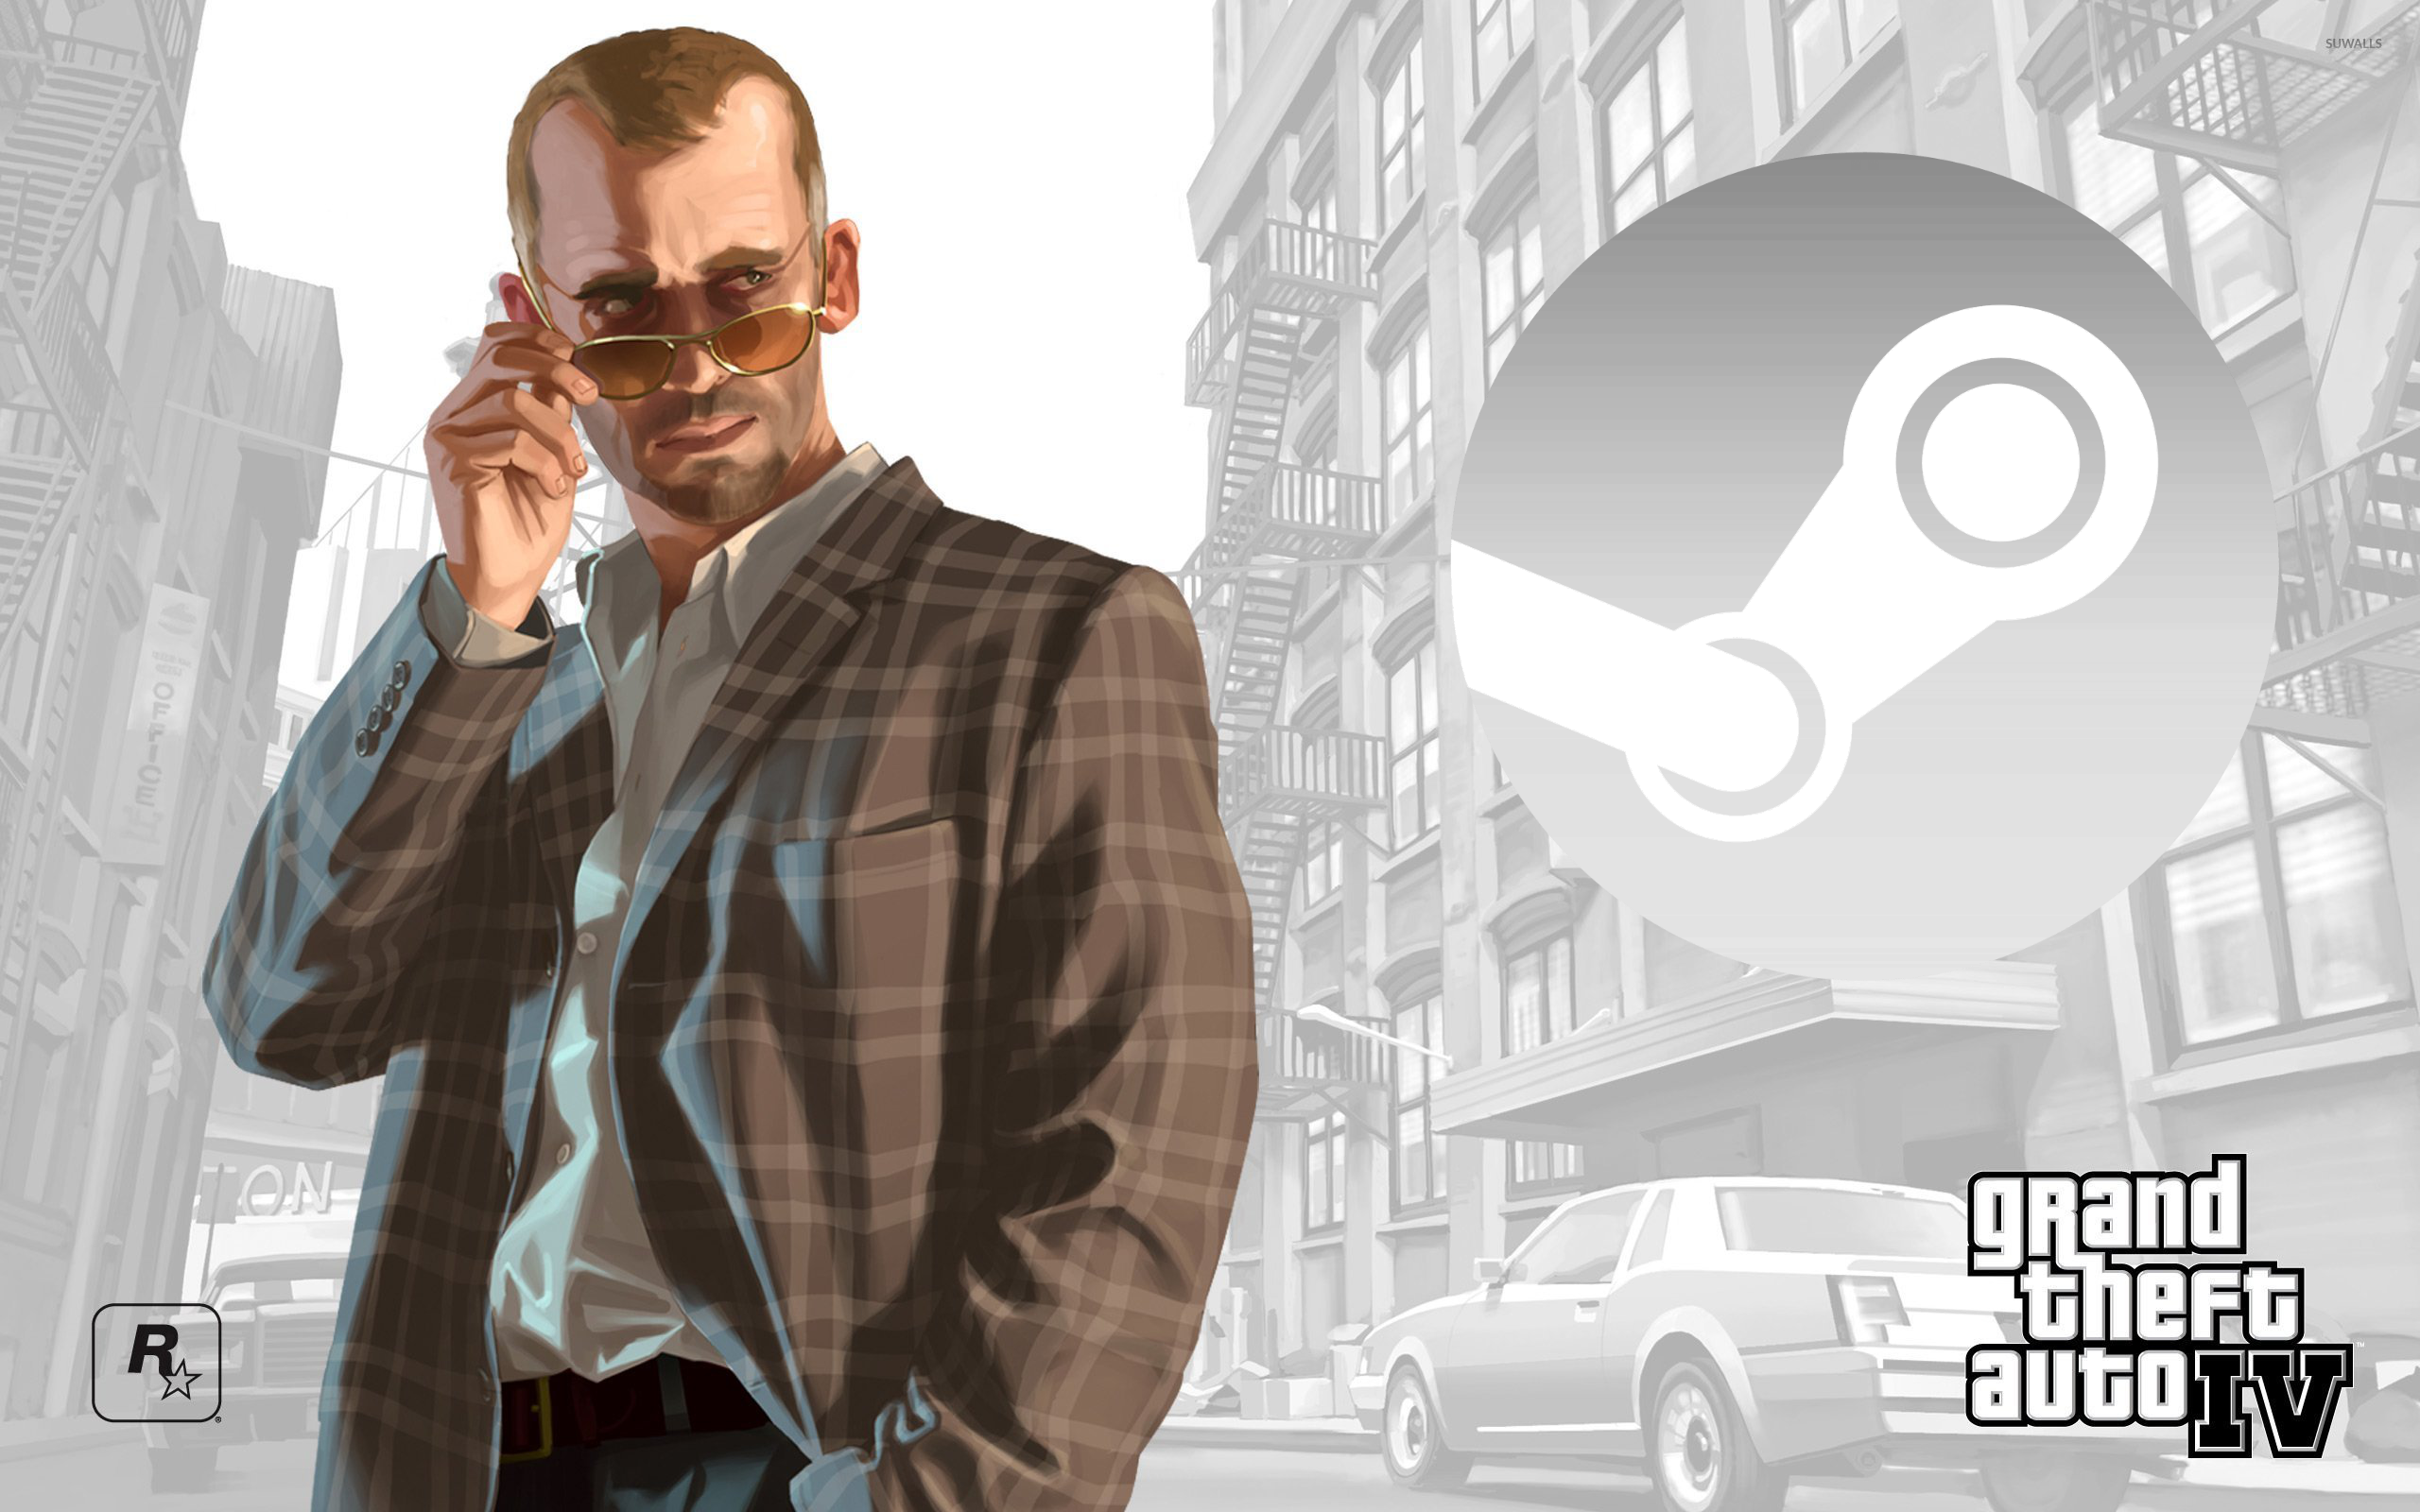 gta episodes from liberty city steam not launching